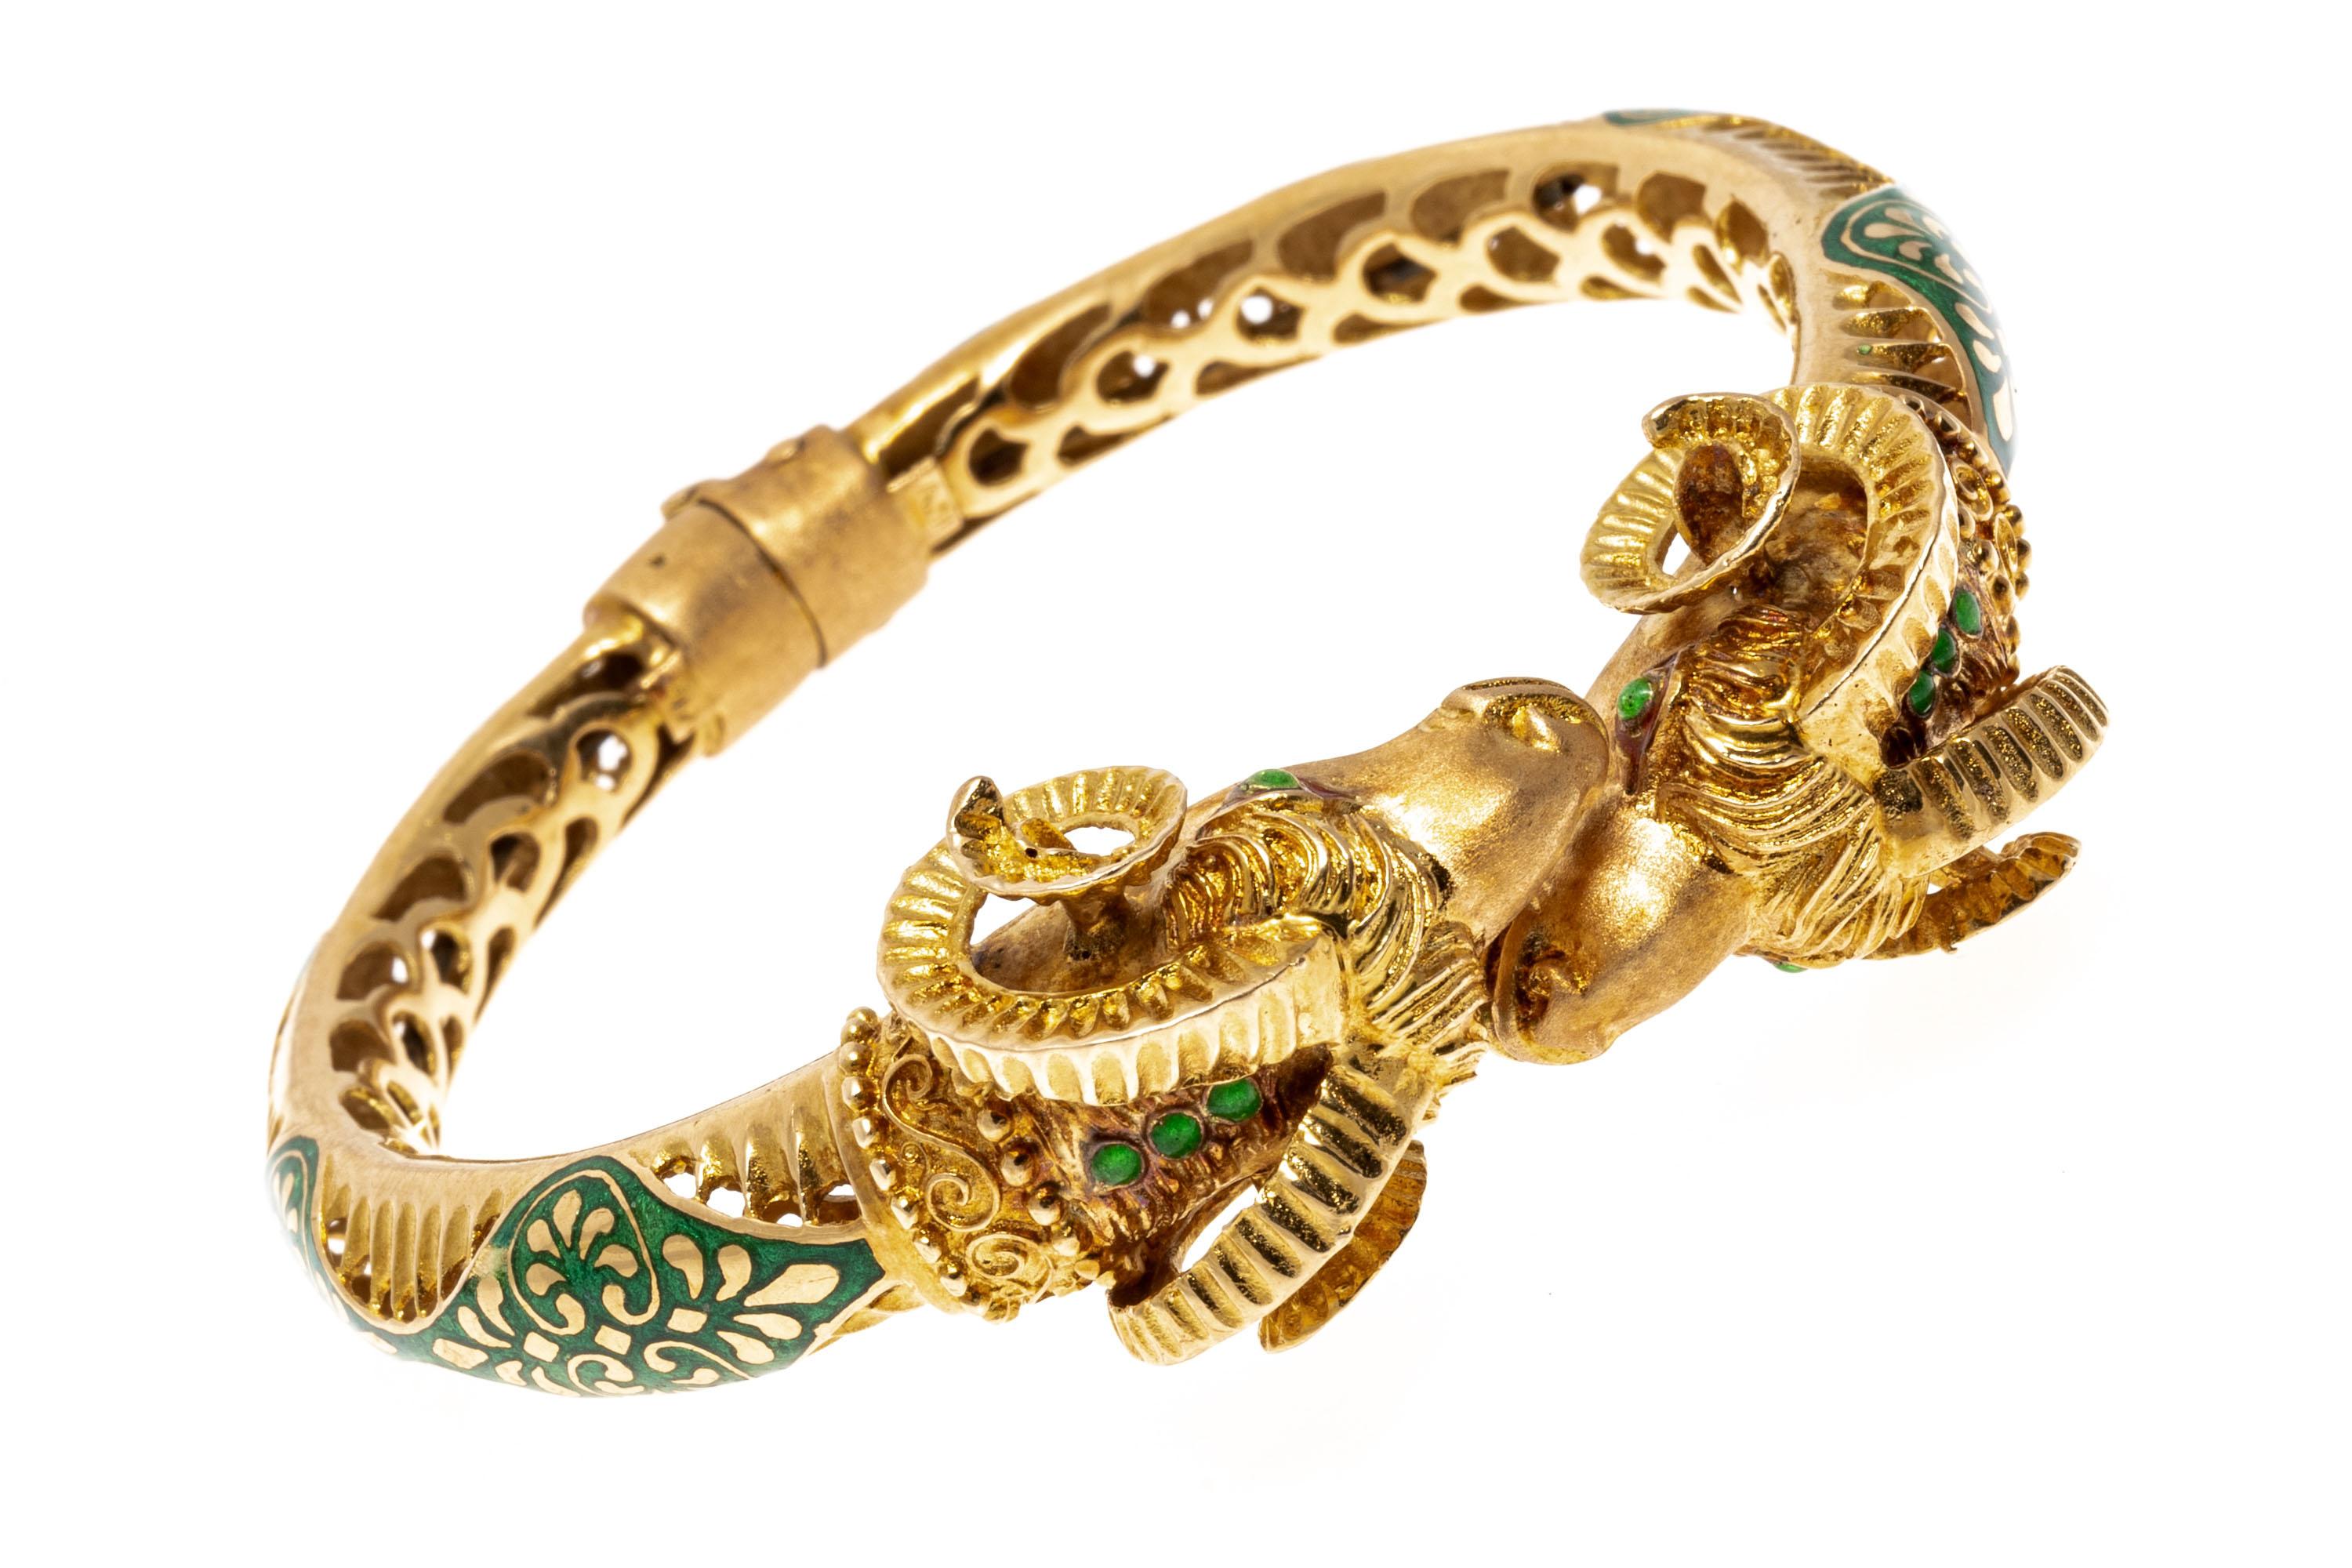 18k Yellow Gold And Green Enamel Bypass Rams Heads Bypass Hinged Cuff Bracelet.
 This beautiful bracelet is a twisted hinged cuff style, with a bypass top of matte finished rams heads. The body of the bracelet is an undulating pattern of alternating